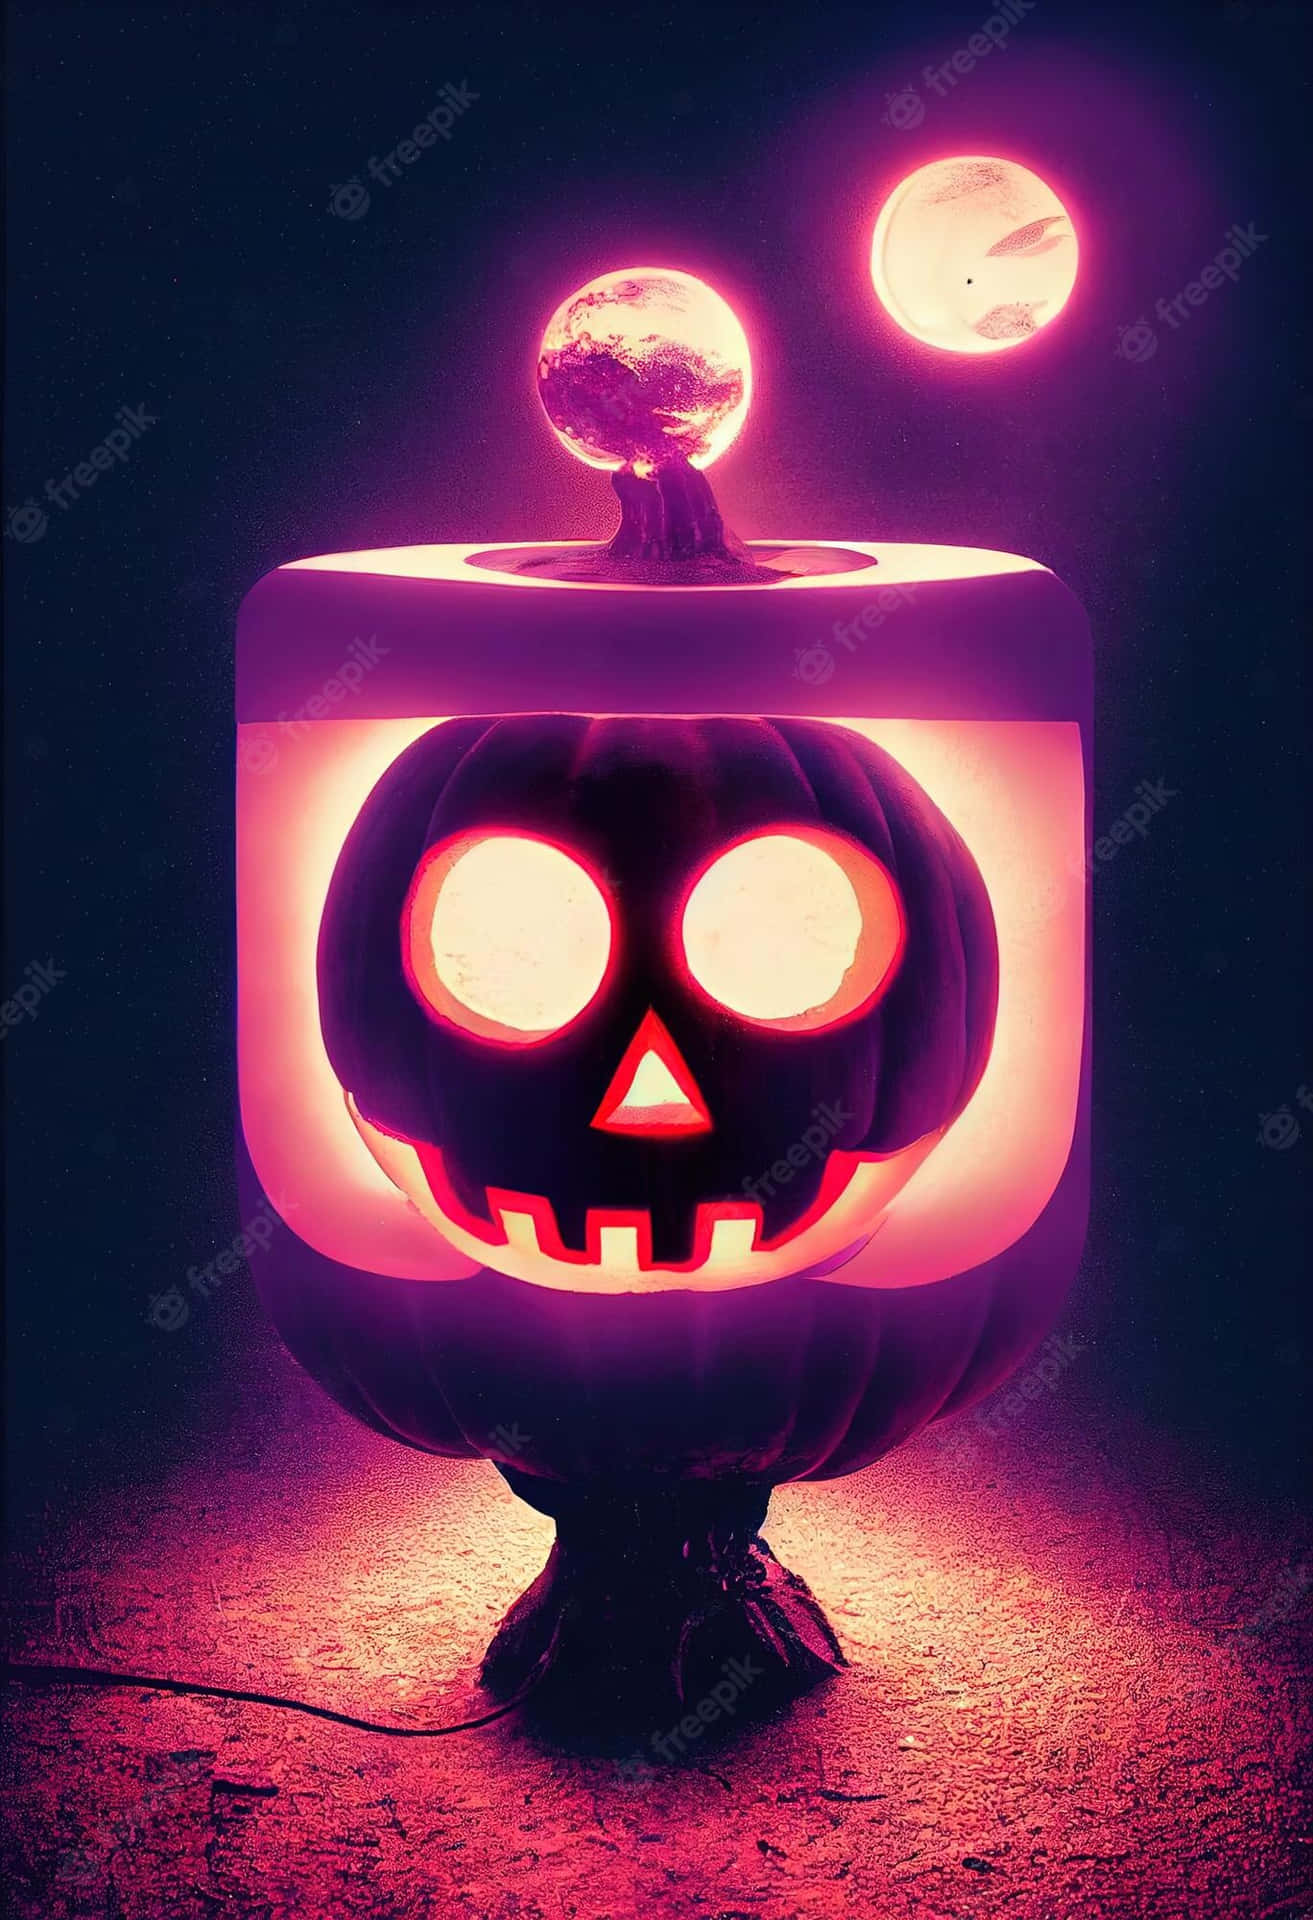 Neon Halloween - Brightly Colored Halloween Costumes Wallpaper